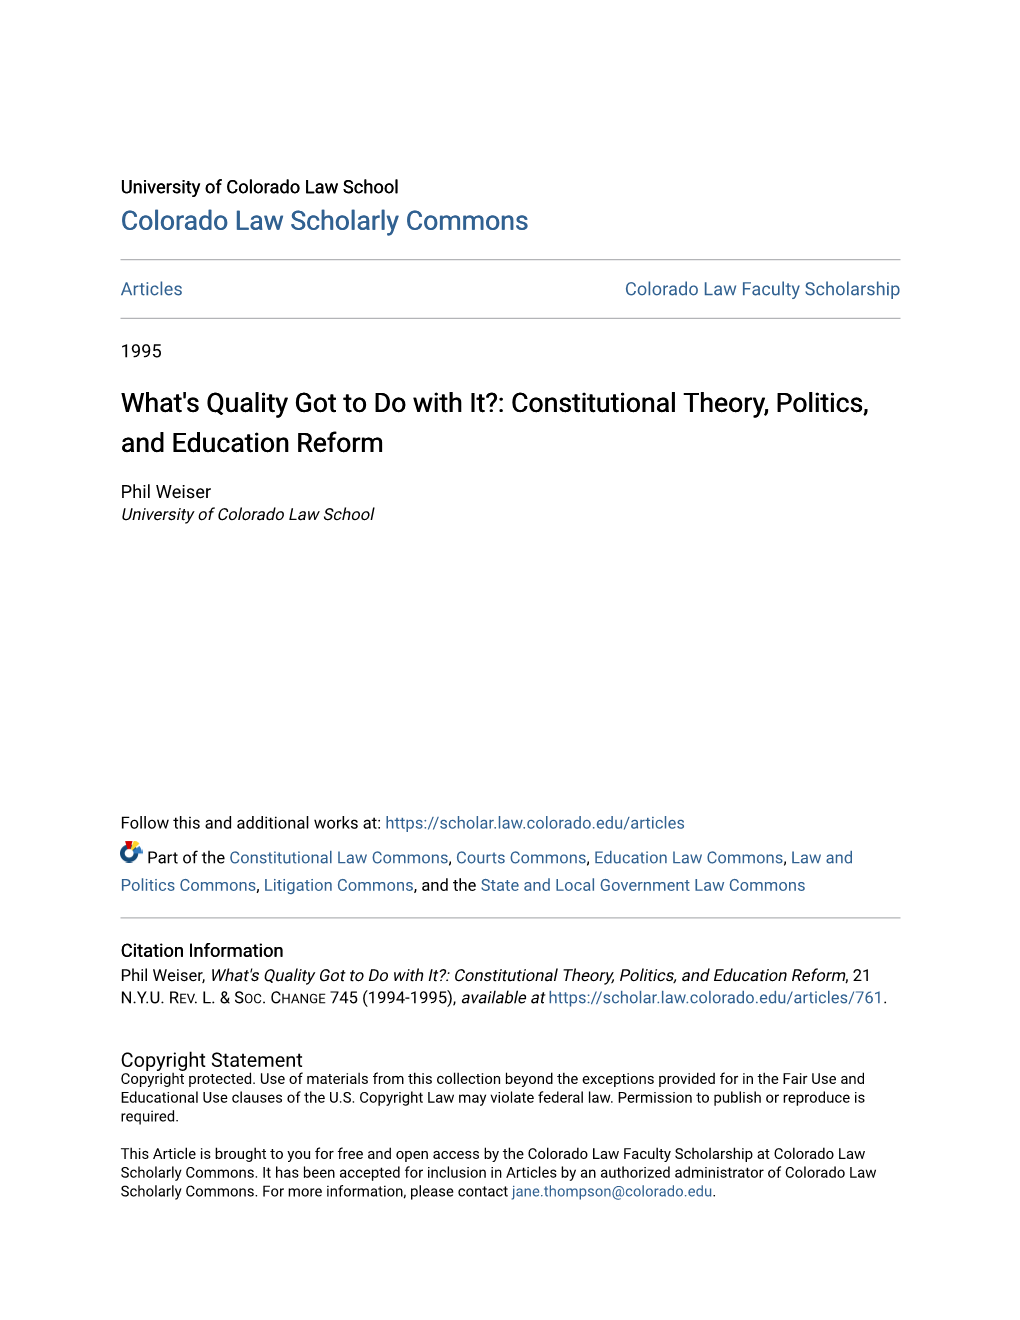 Constitutional Theory, Politics, and Education Reform